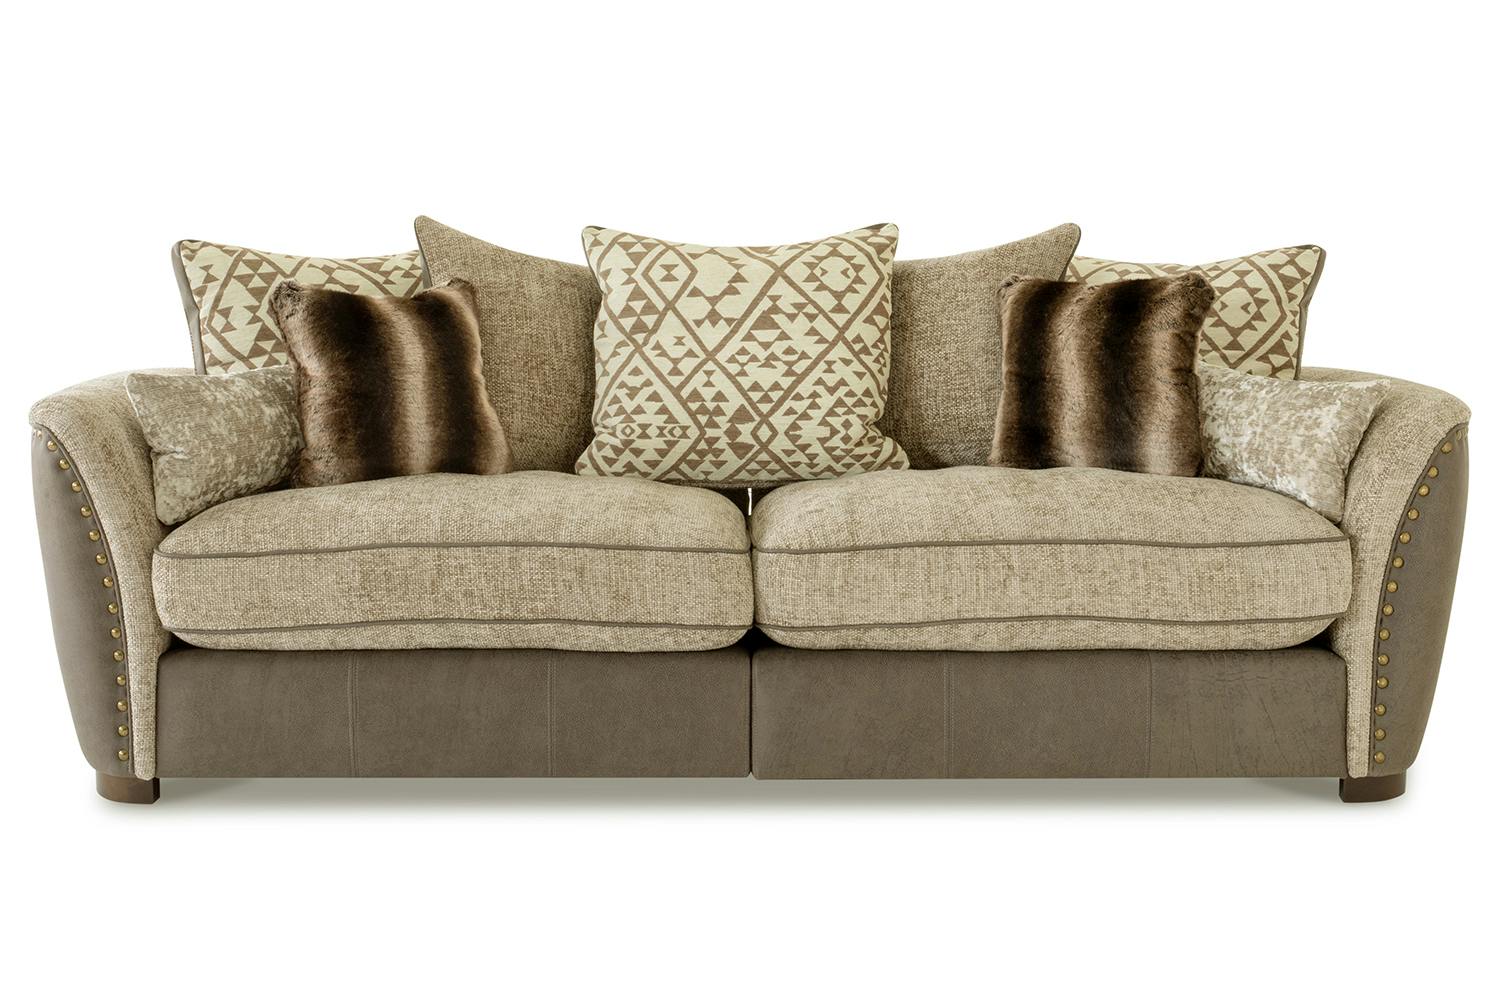 Coco 4 Seater Sofa | Pillow Back